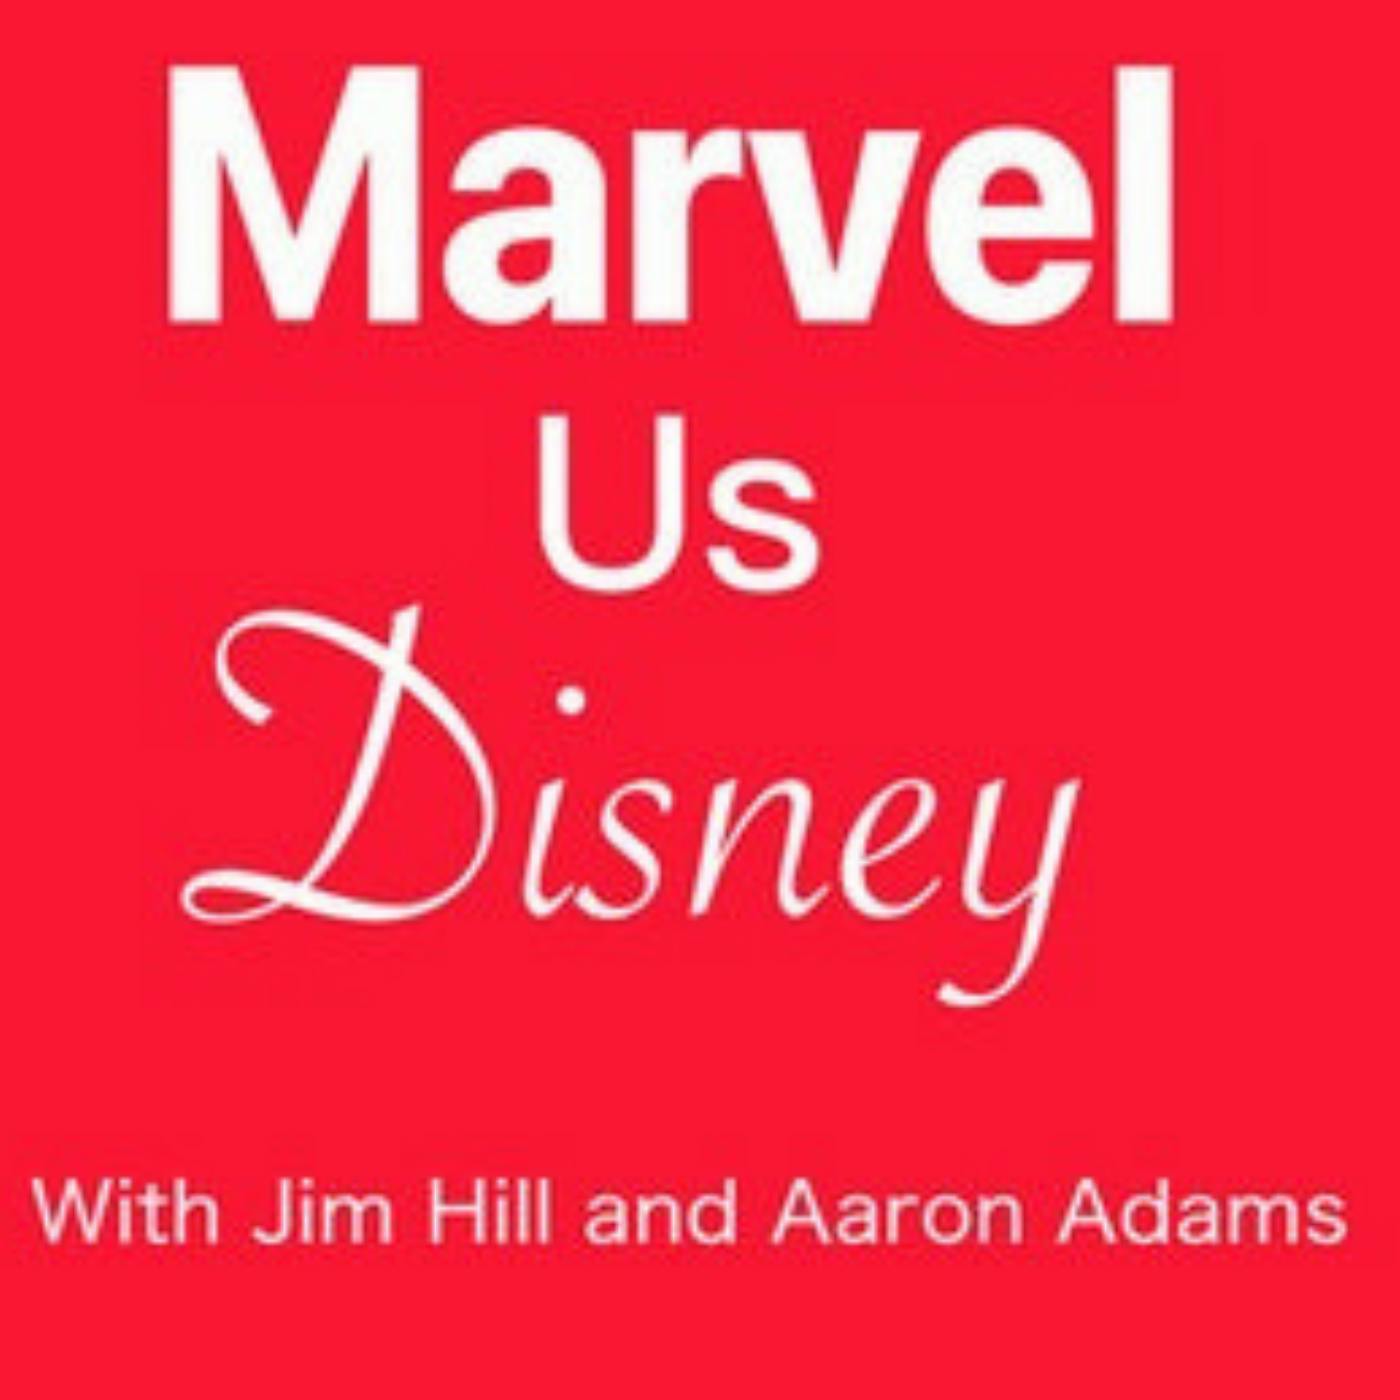 Marvel Us Disney Episode 109: “Hawkeye” off to a strong start